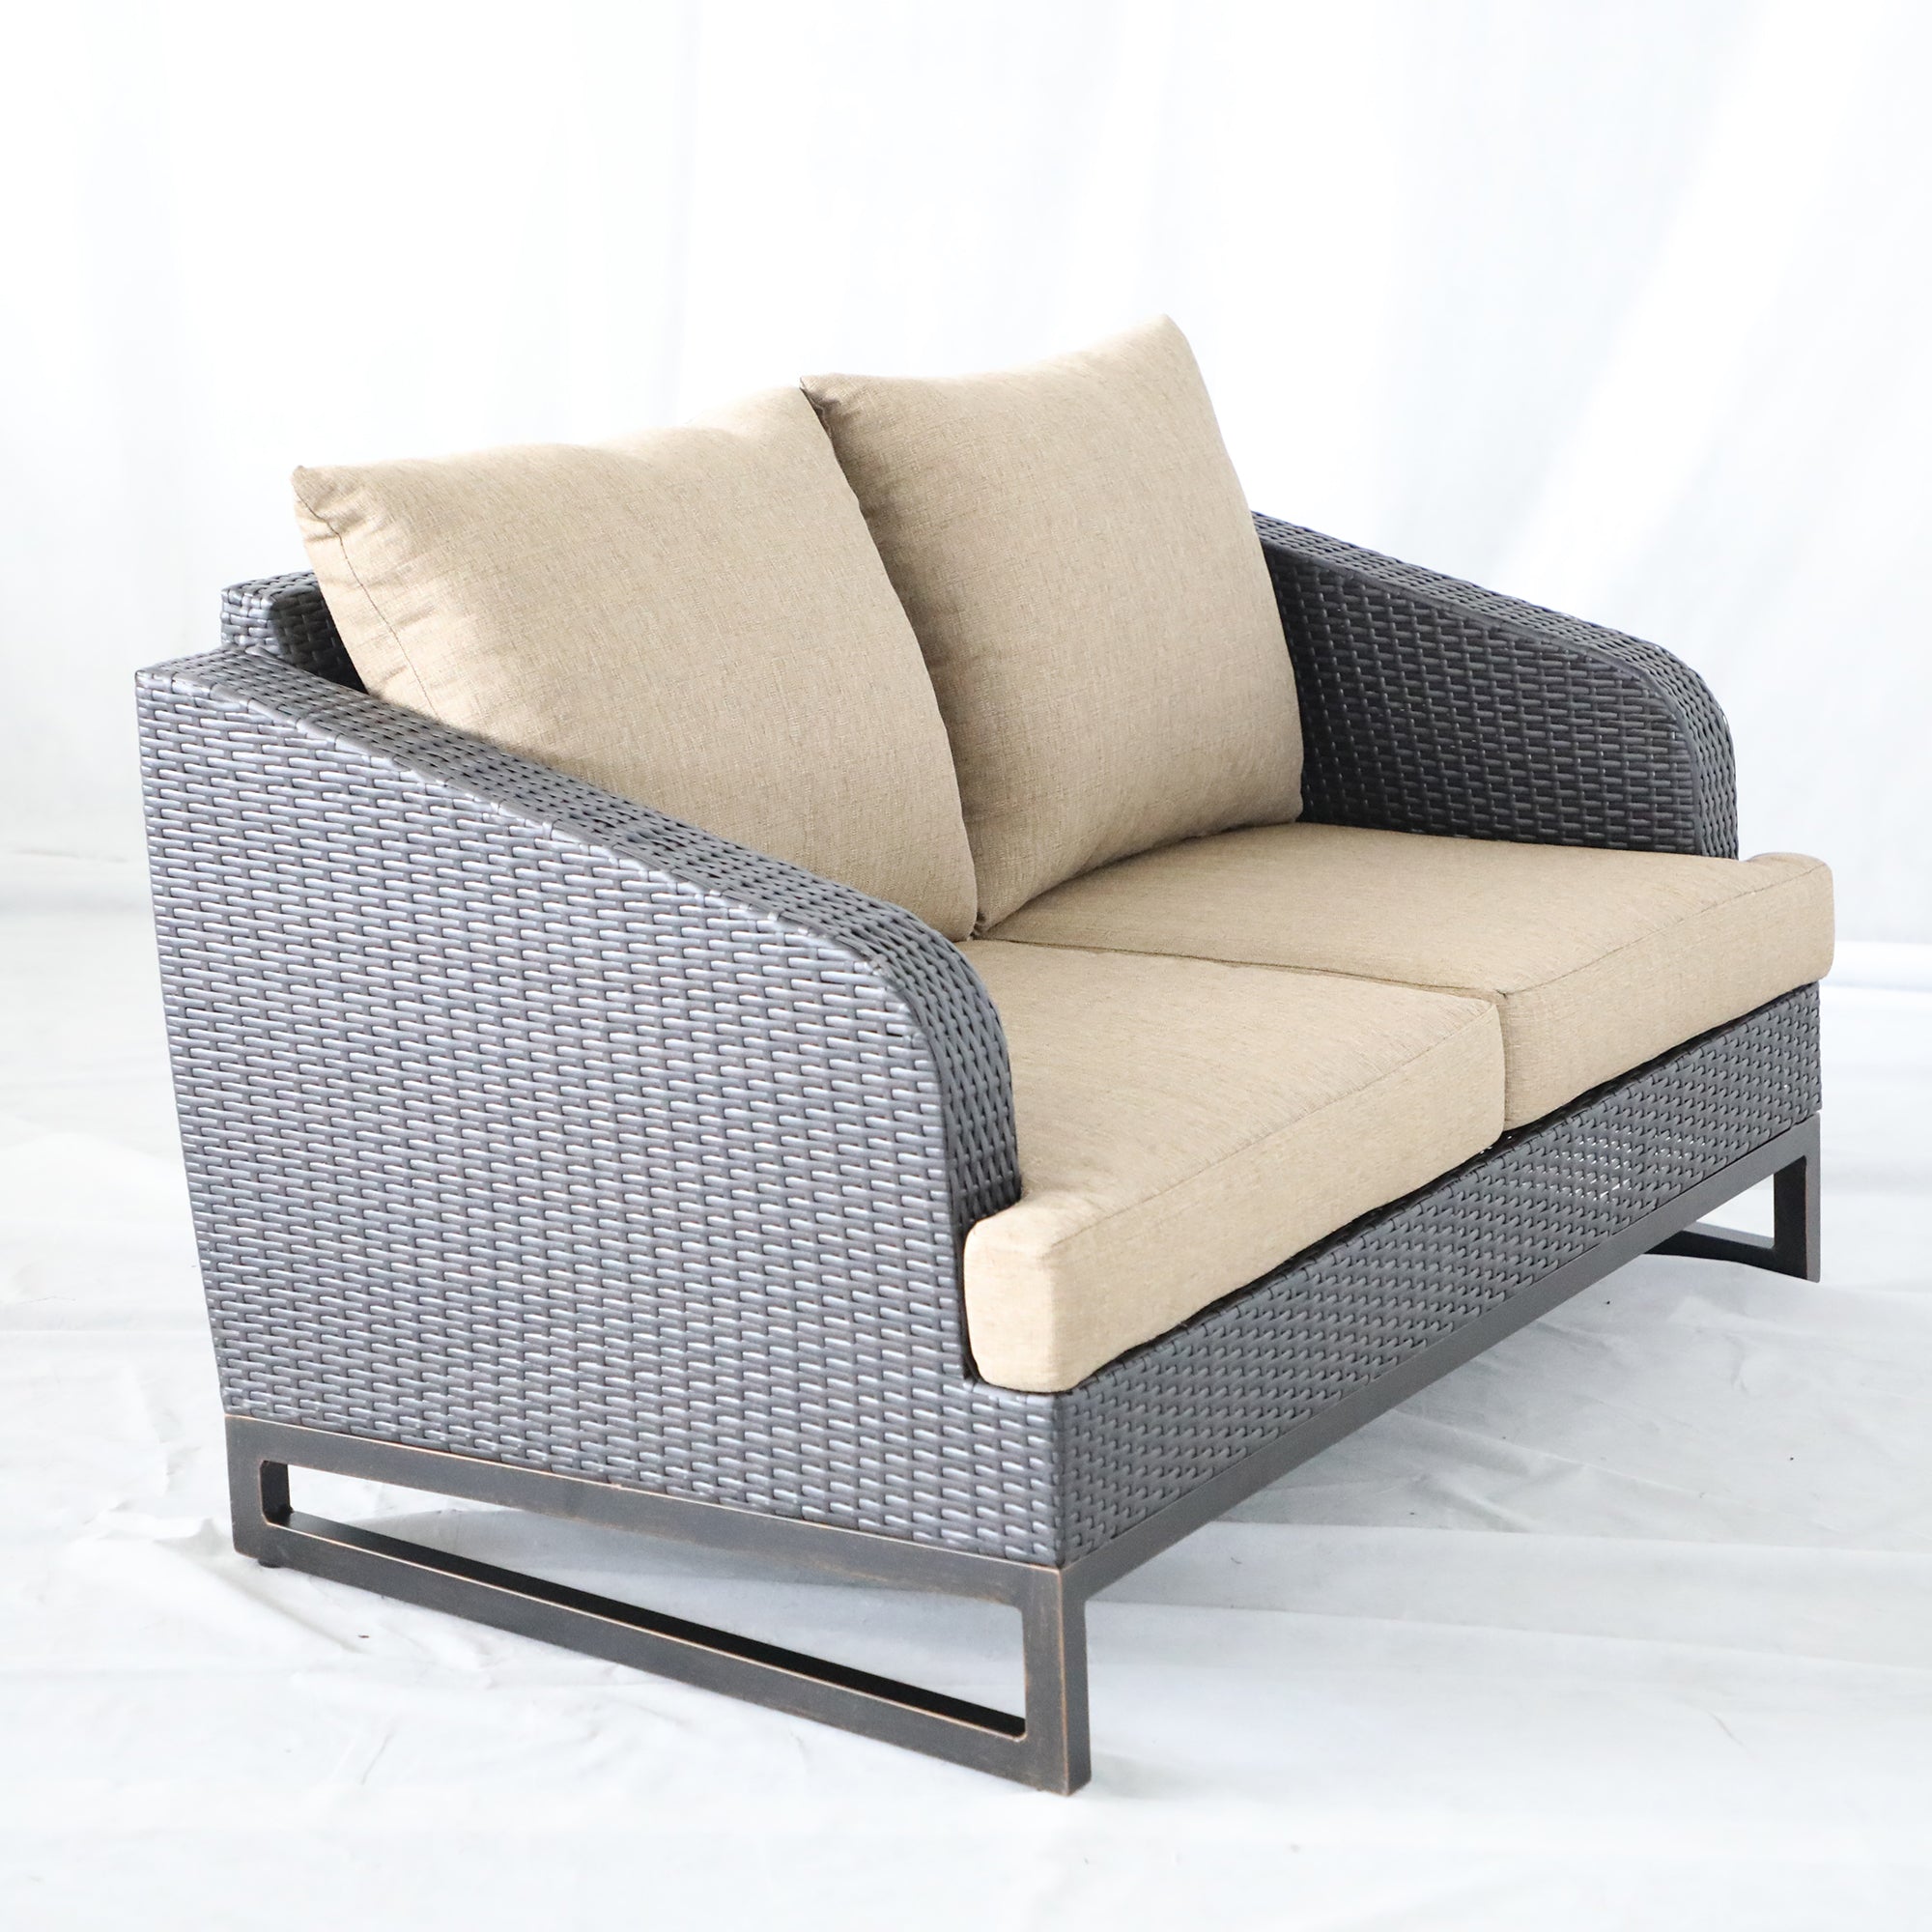 Comal Outdoor Furniture, Wicker Loveseat With